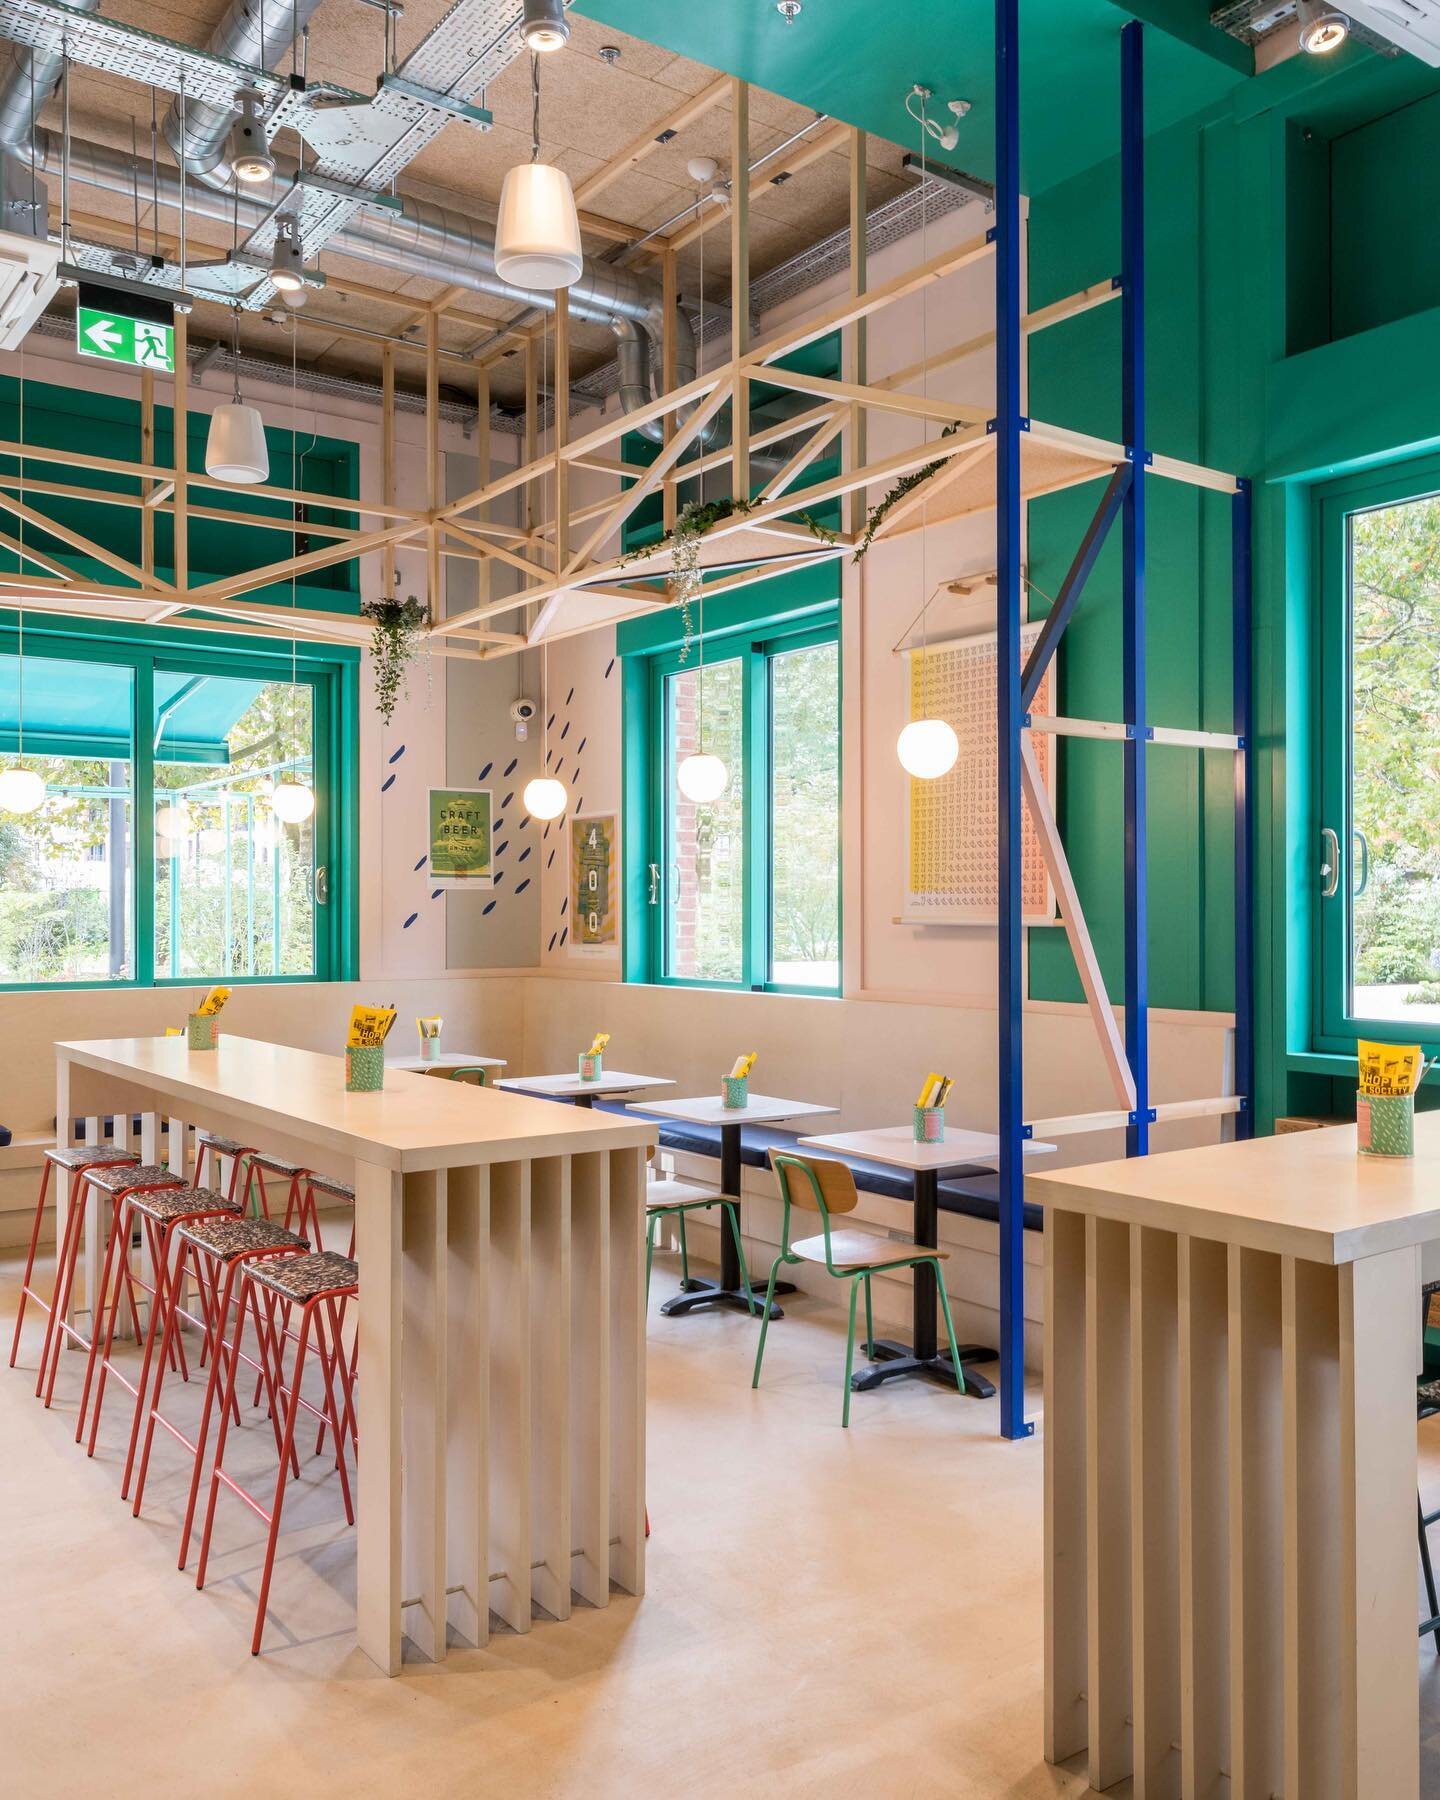 🌟New project photos 🌟@4hundredrabbits in @elephantparklondon 
Completing this project during lockdown was a challenge but so worth it to create a light and airy space to eat some of the best pizzas in London! 🍕❤️🍕❤️
Photos by the super talented @